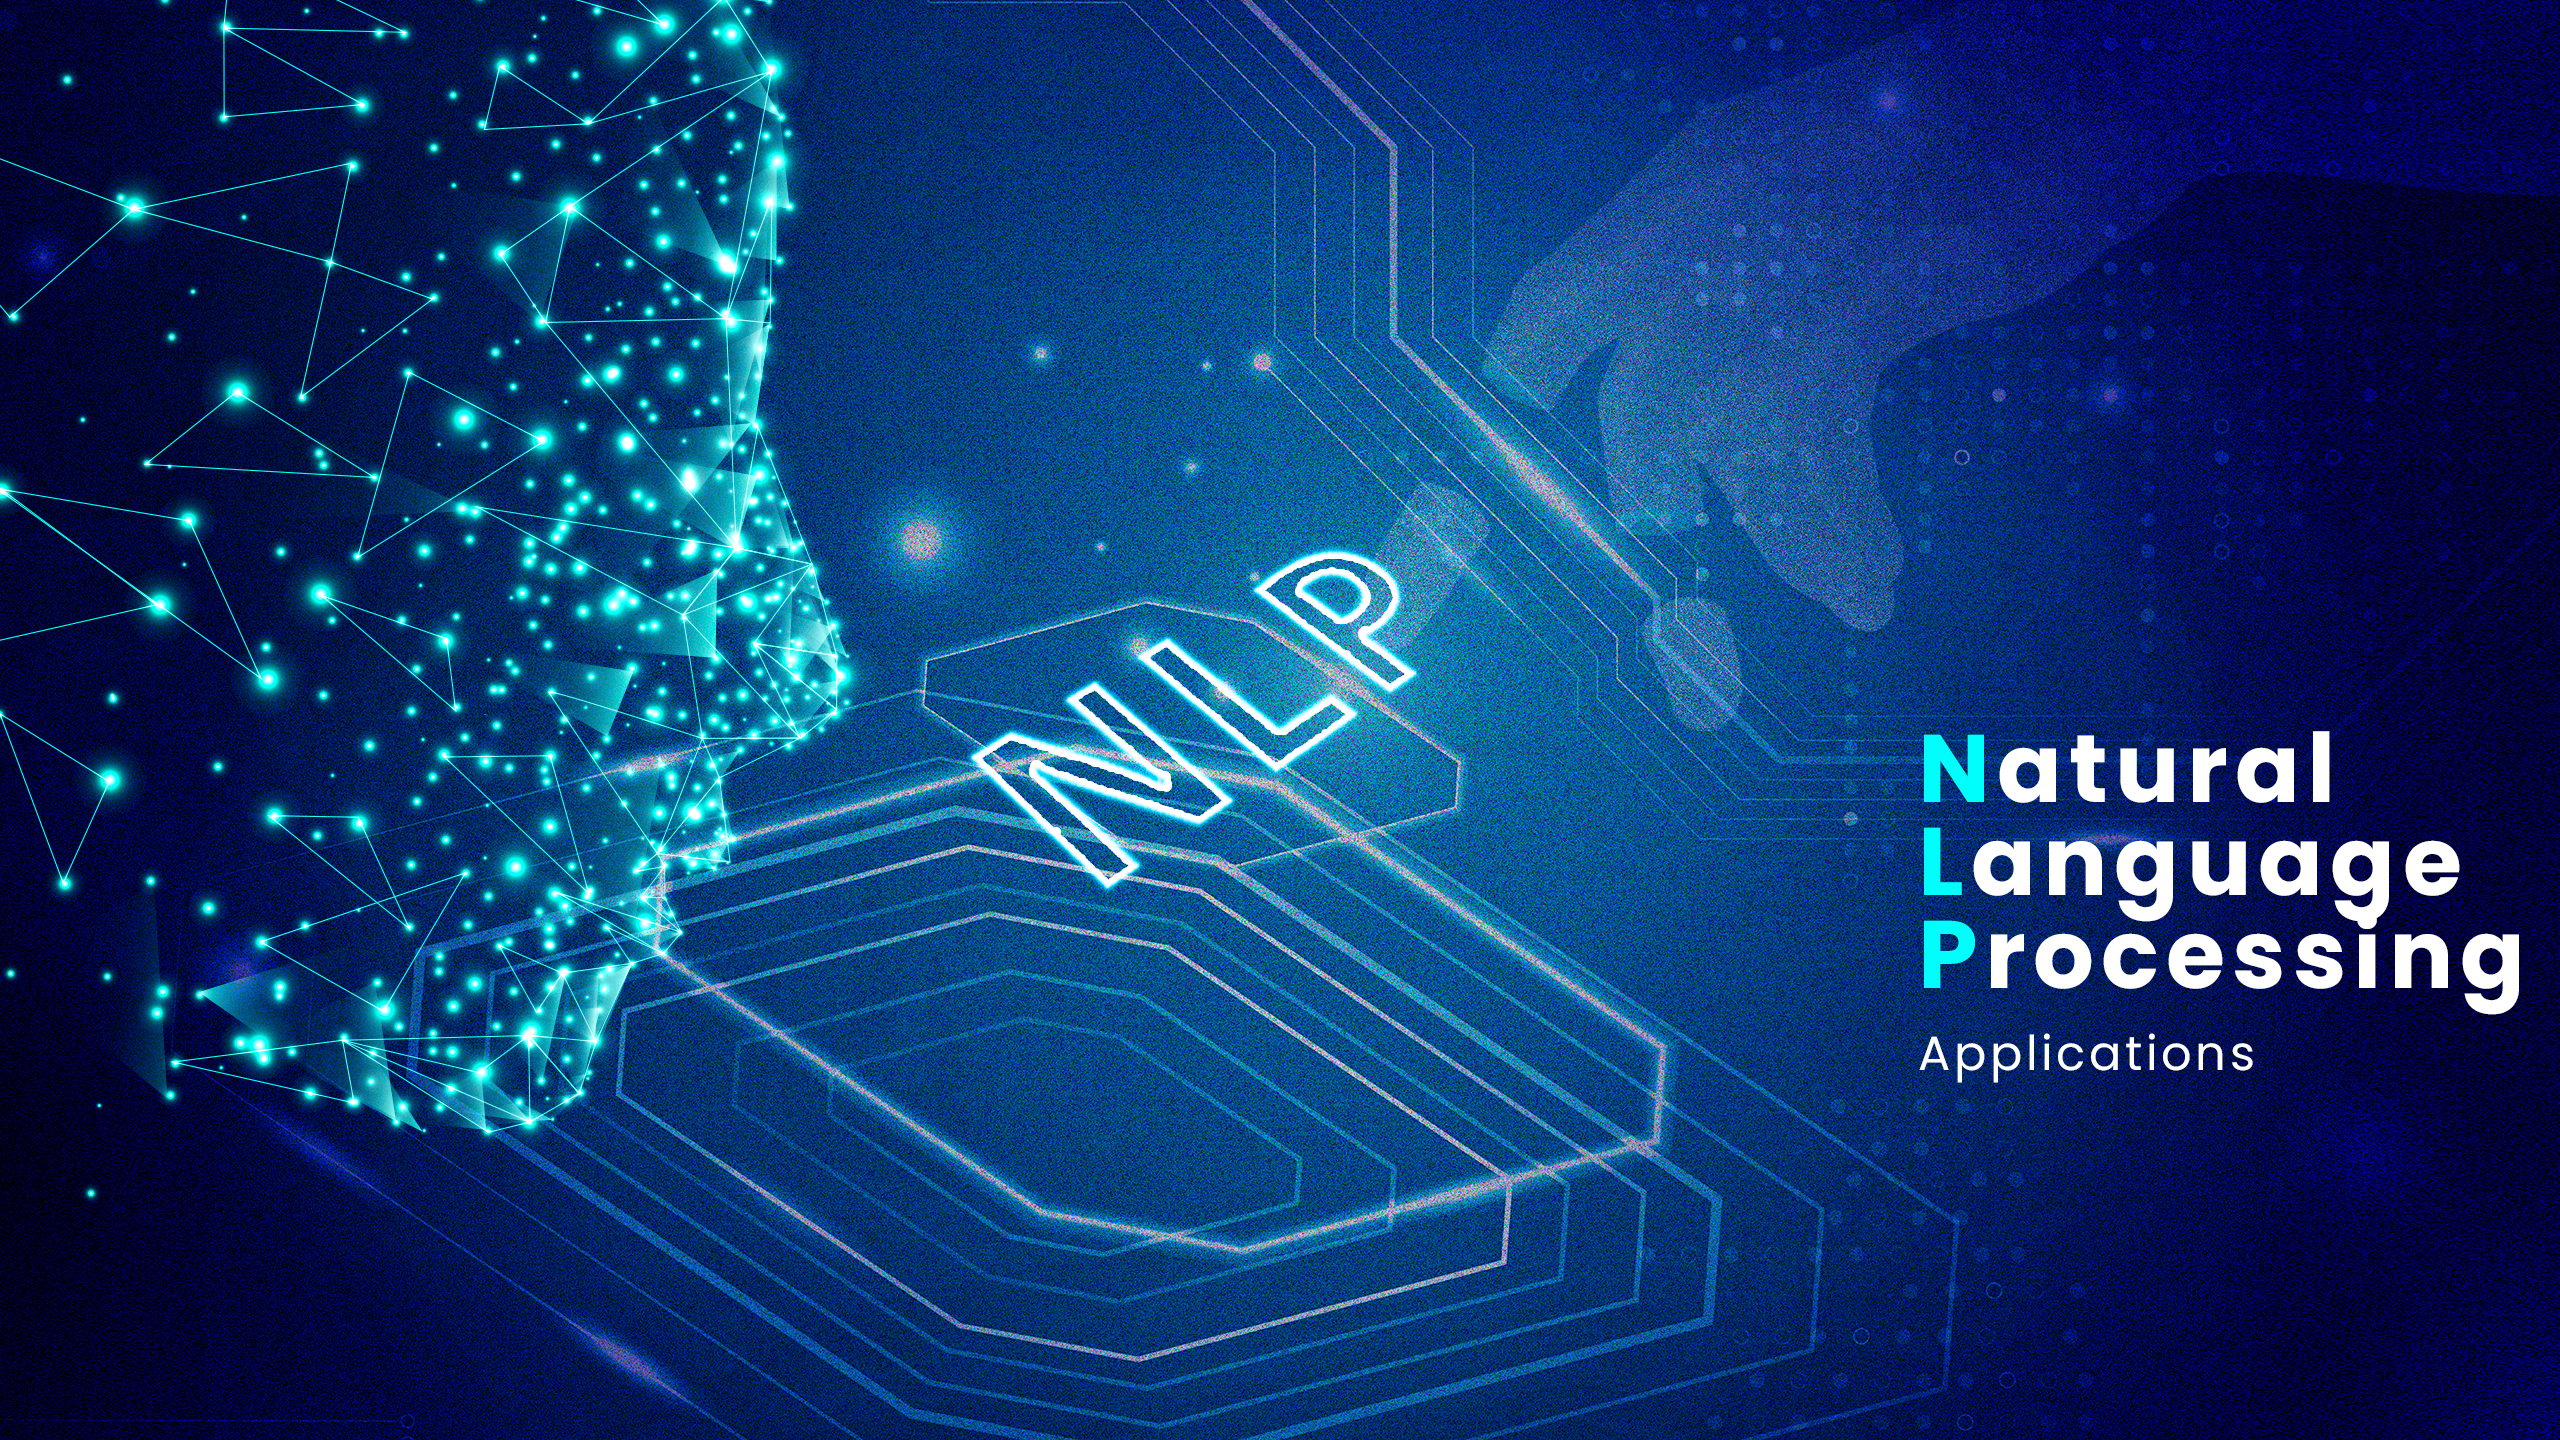 The Impact of NLP in Fintech: Natural Language Processing Applications